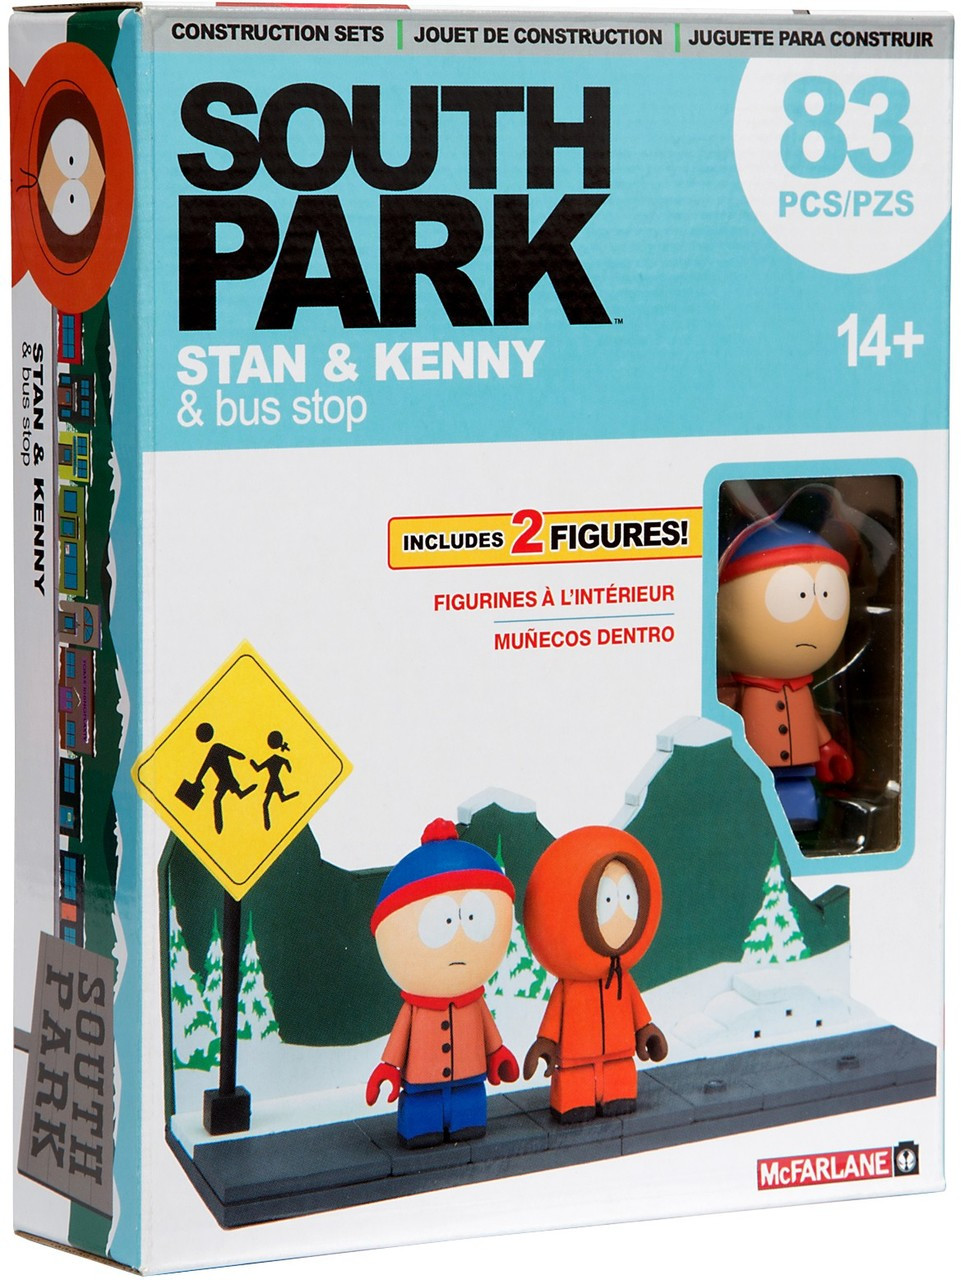 Mcfarlane Toys South Park Stan Kenny With The Bus Stop Small Construction Set Toywiz - why stan why kenny why also recently i was playing roblox